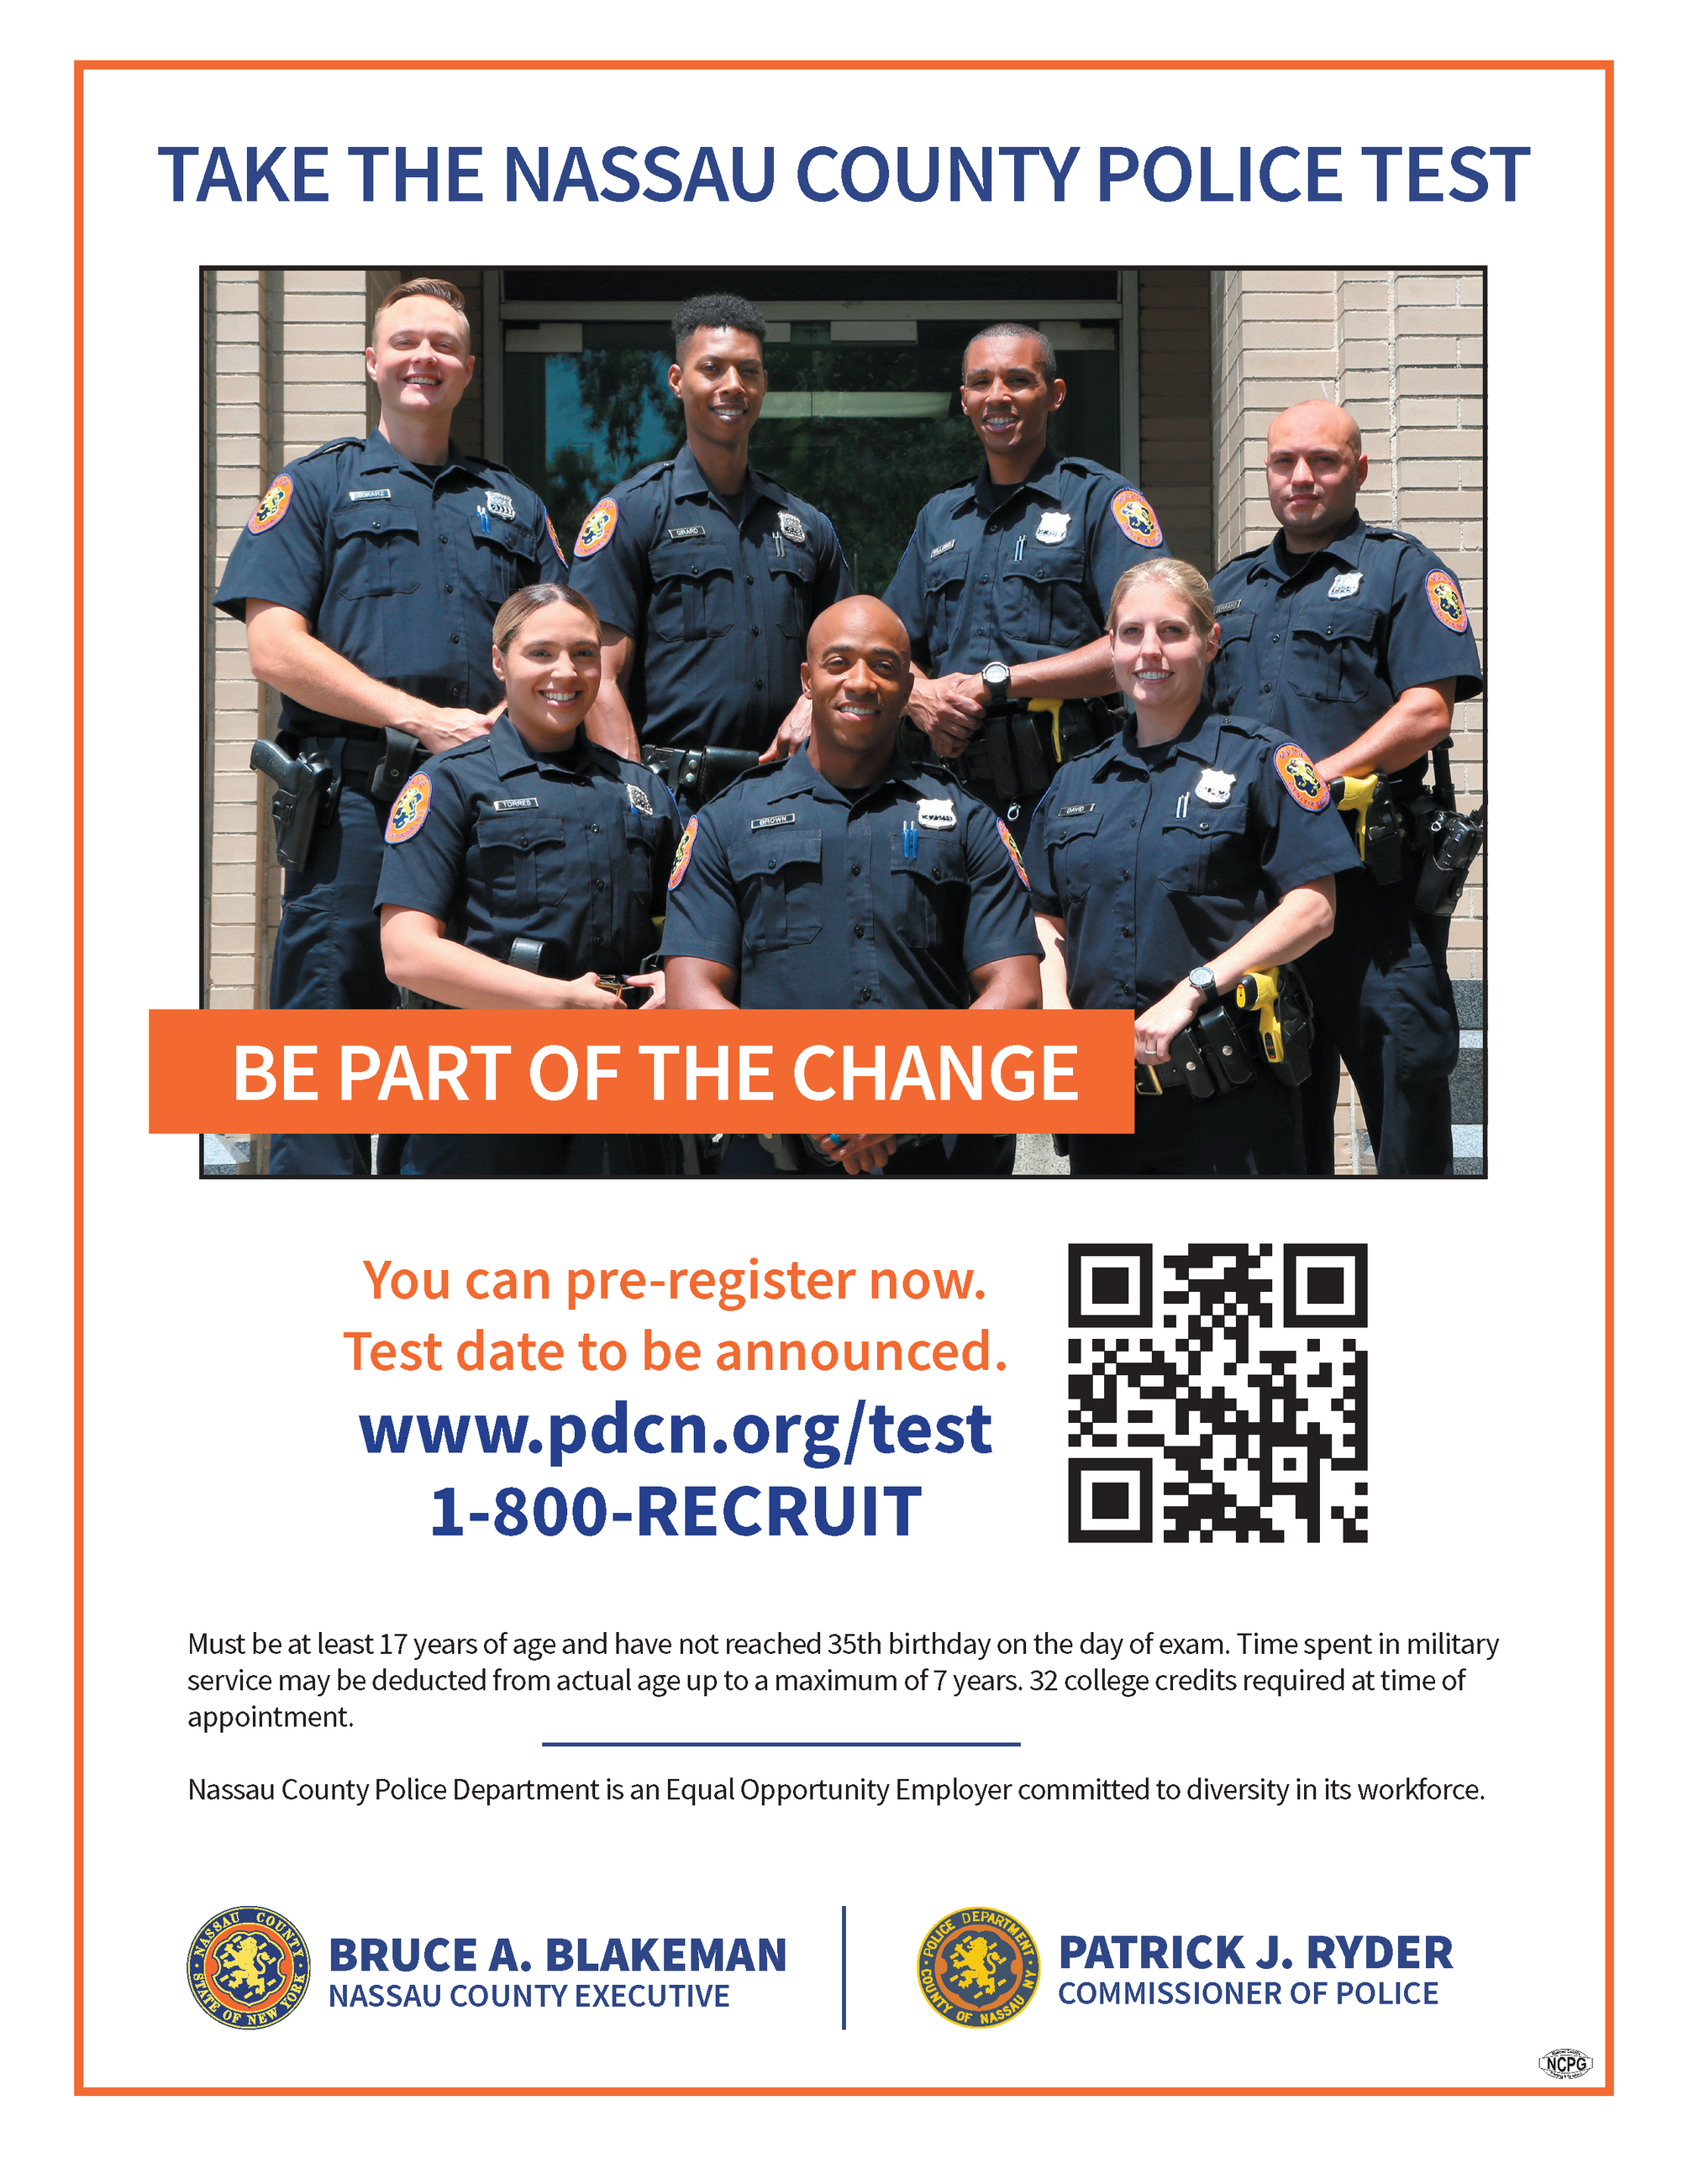 NCPD Recruitment 2021 8.5 x 11 Opens in new window